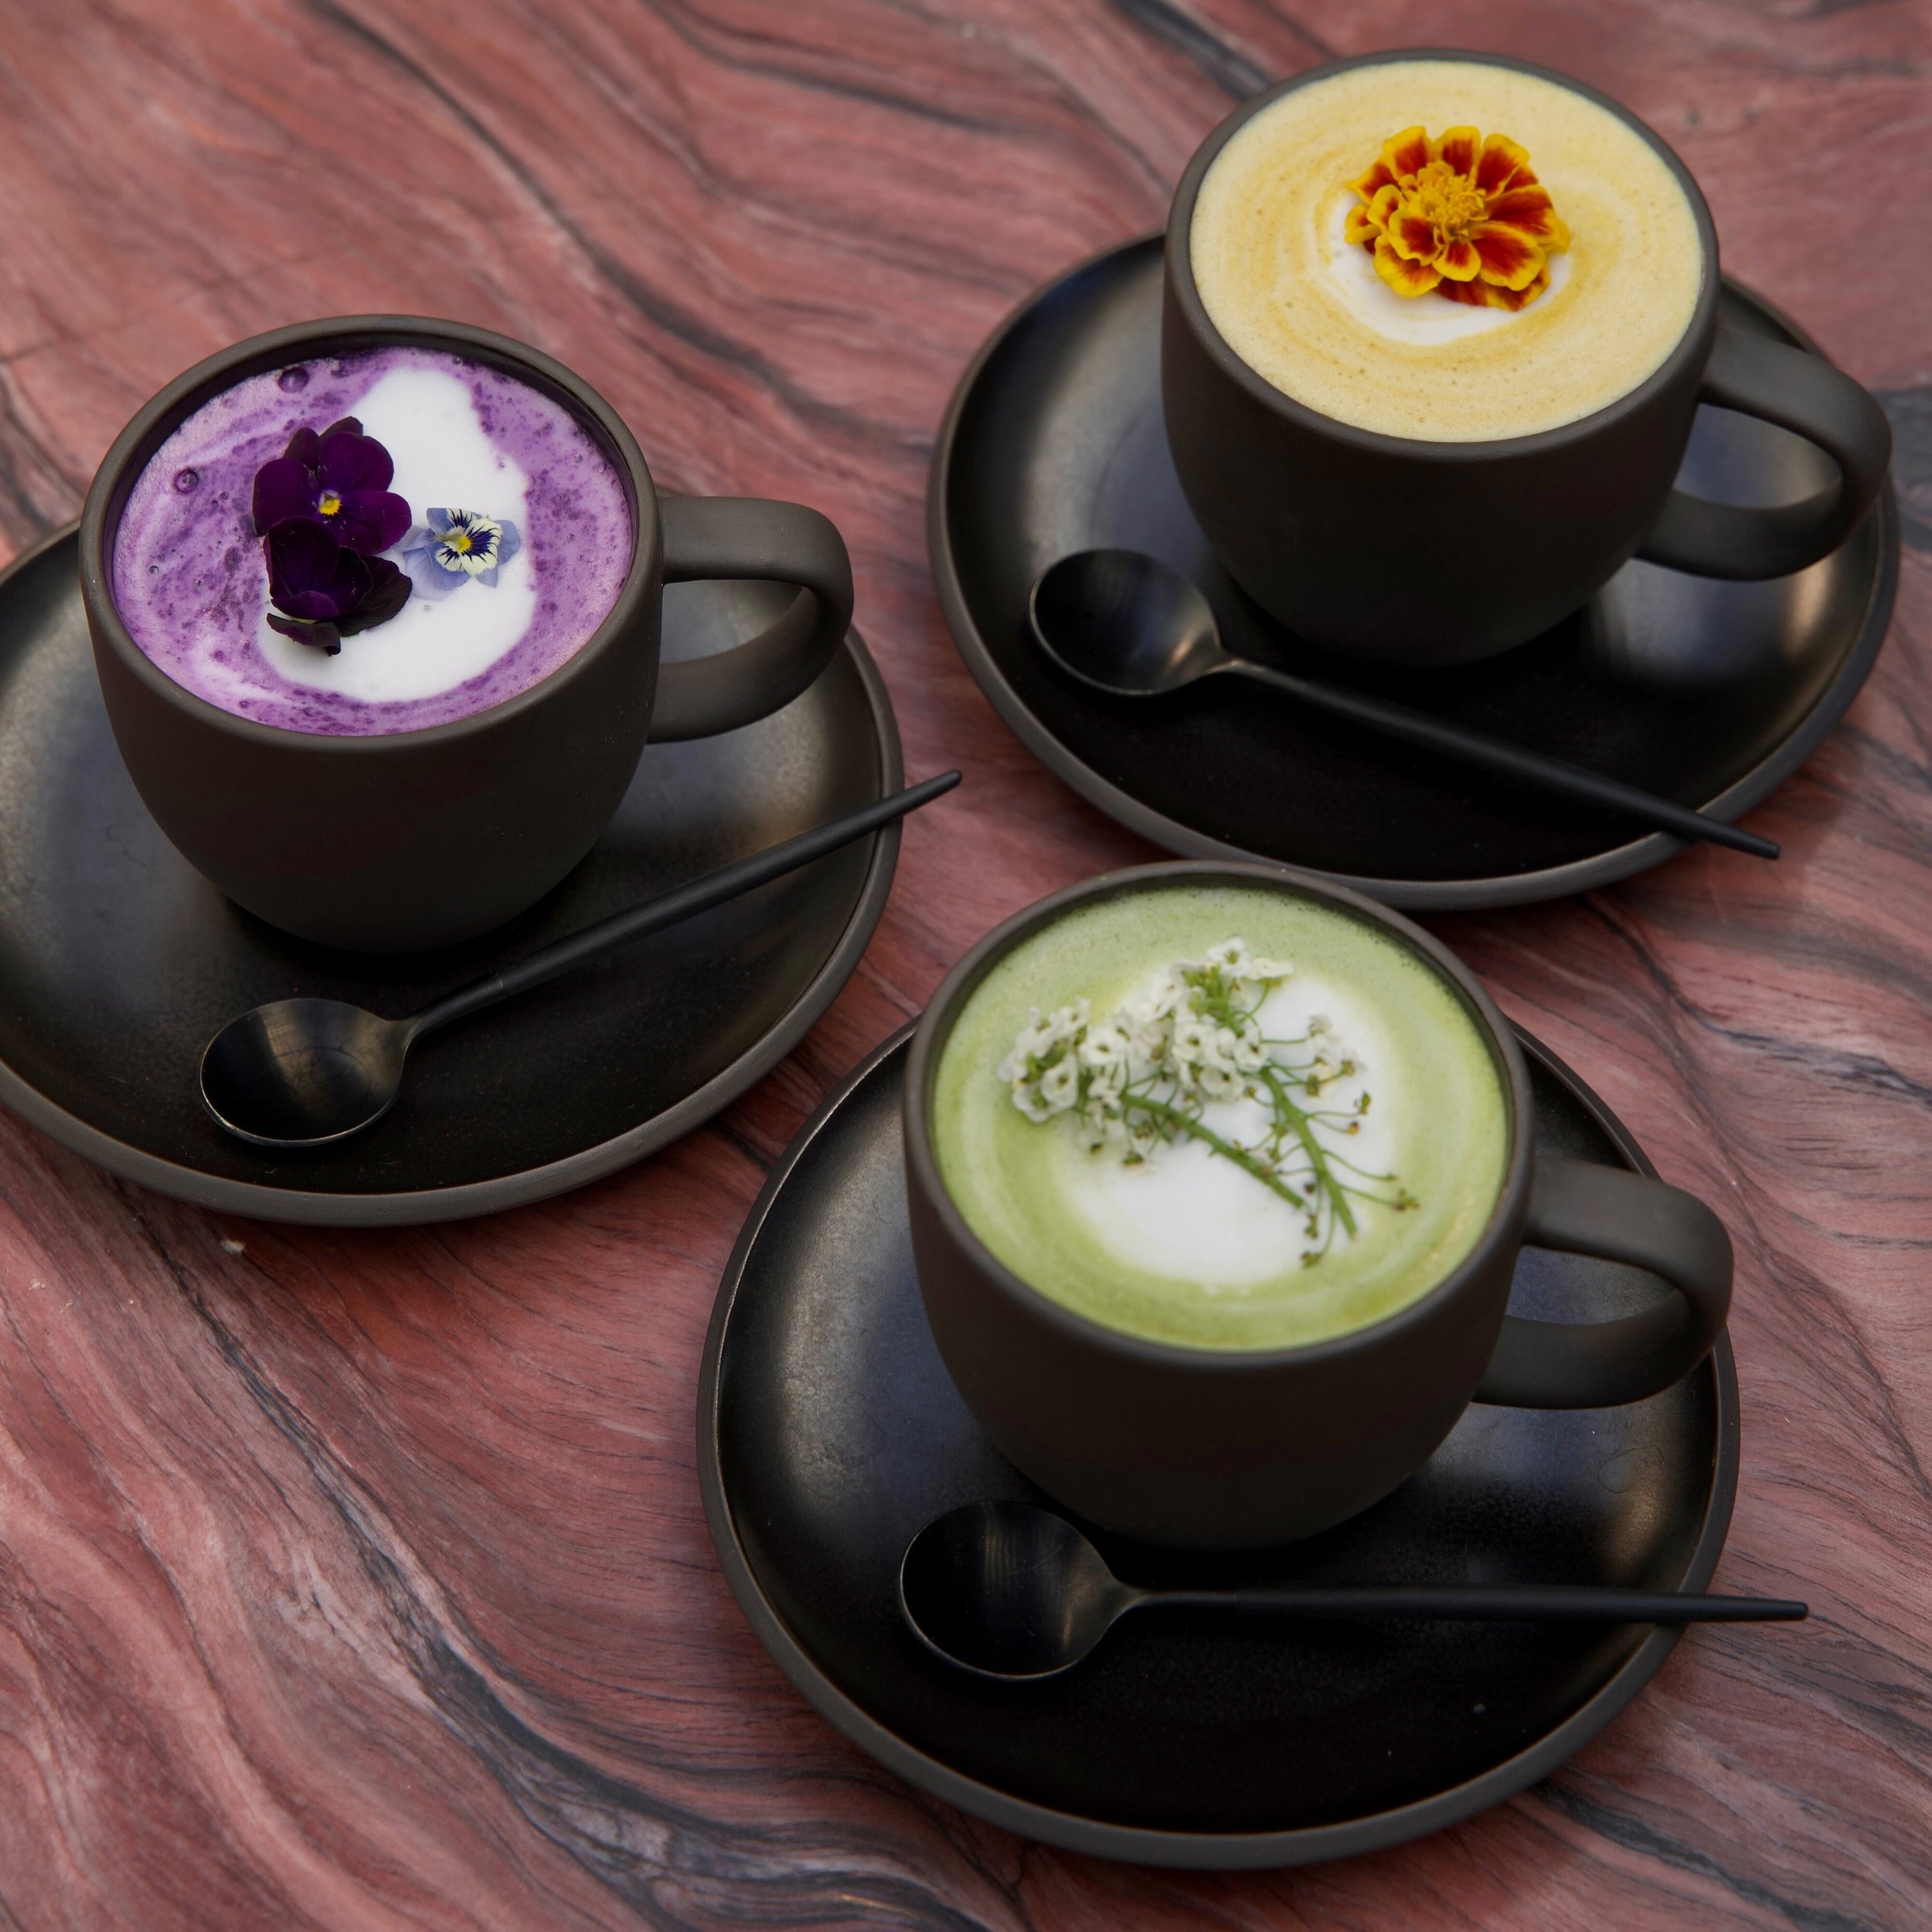 Indulge in the decadent flavors of our signature lattes during Sunday Brunch at #MILArestaurants. Whether you choose the aromatic Lavender Ube, the refreshing Matcha Pandan, or the warming Turmeric Milk, each sip promises a delightful experience. See